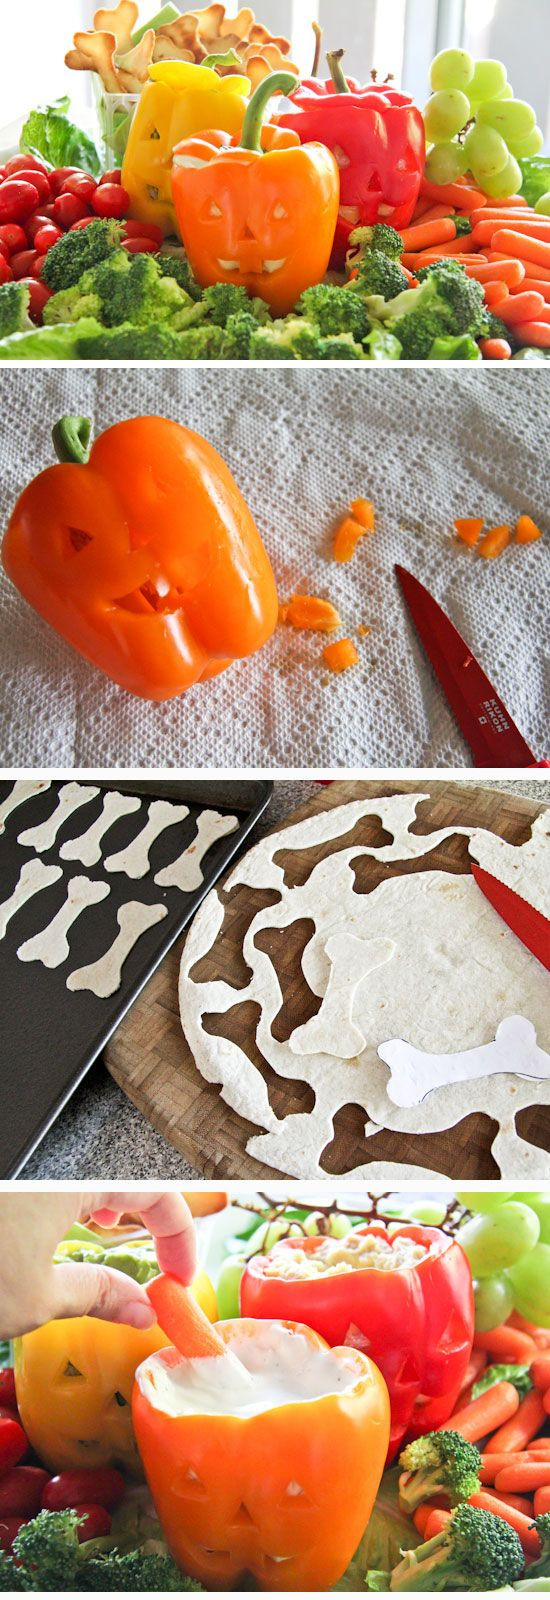 Healthy Halloween Snacks For Kids
 20 Easy to Make Halloween Party Food Ideas